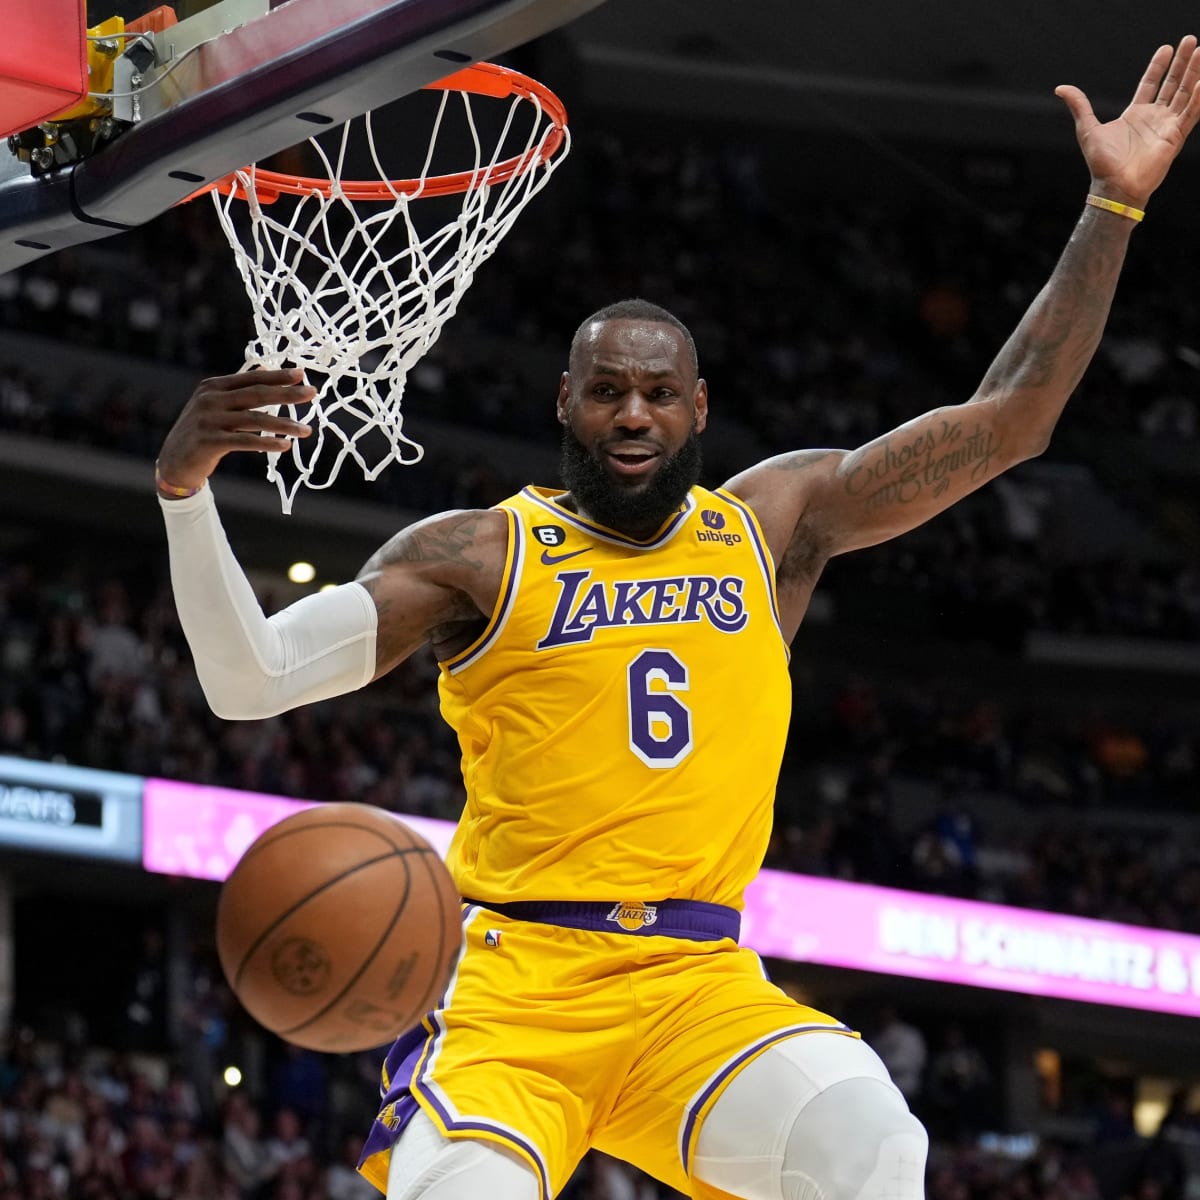 LeBron James stuns NBA world as he loses ball on breakaway dunk attempt